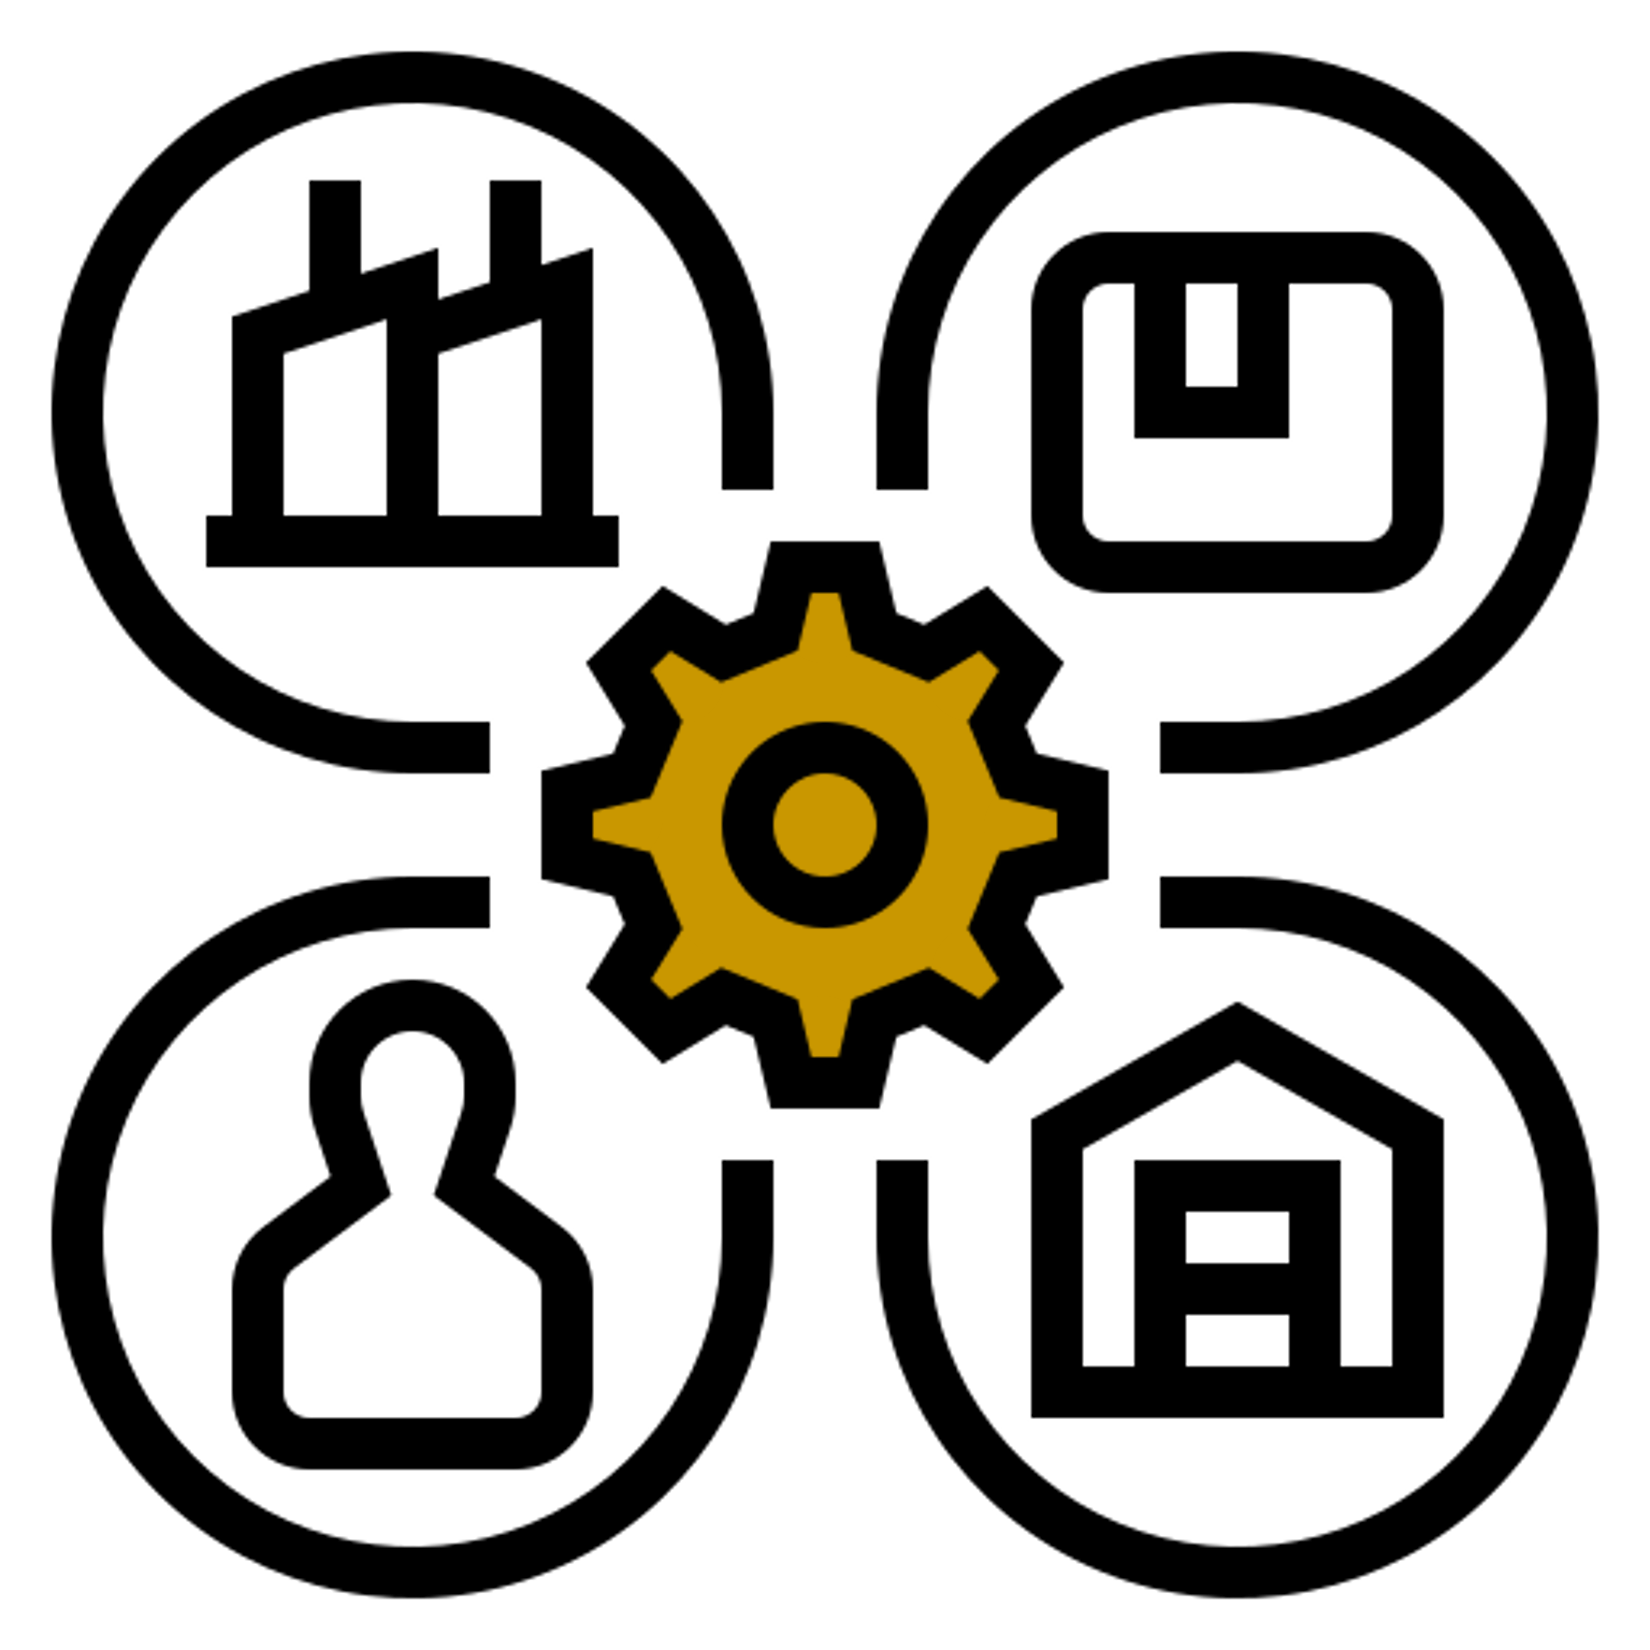 Icon outline of a supply chain involving transportation, manufacturing and delivery.